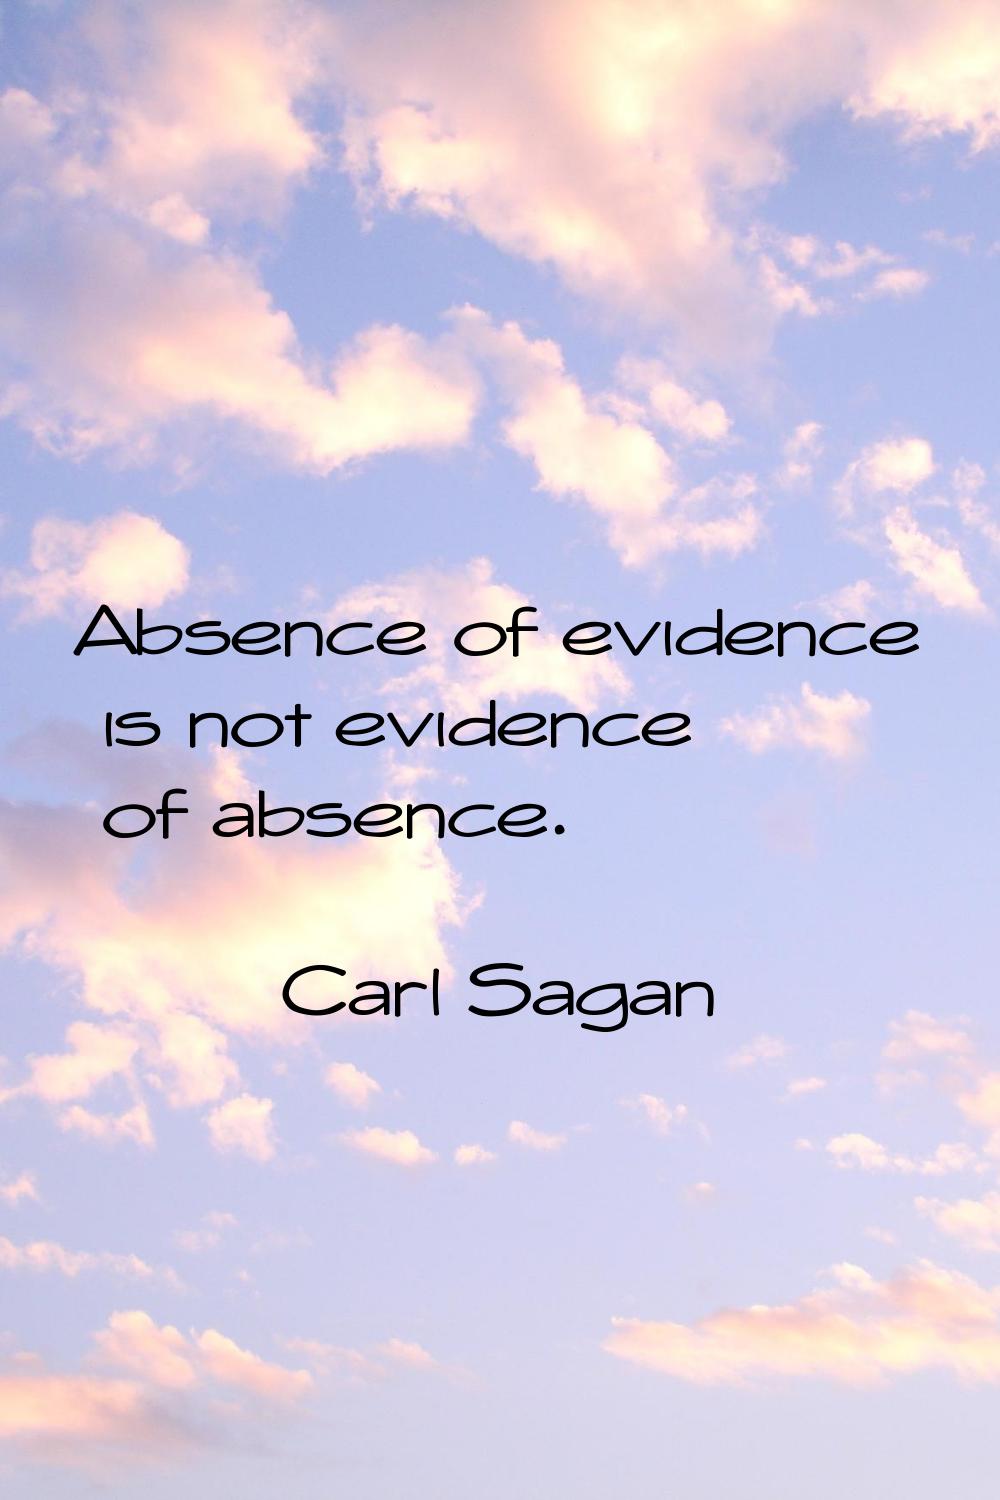 Absence of evidence is not evidence of absence.